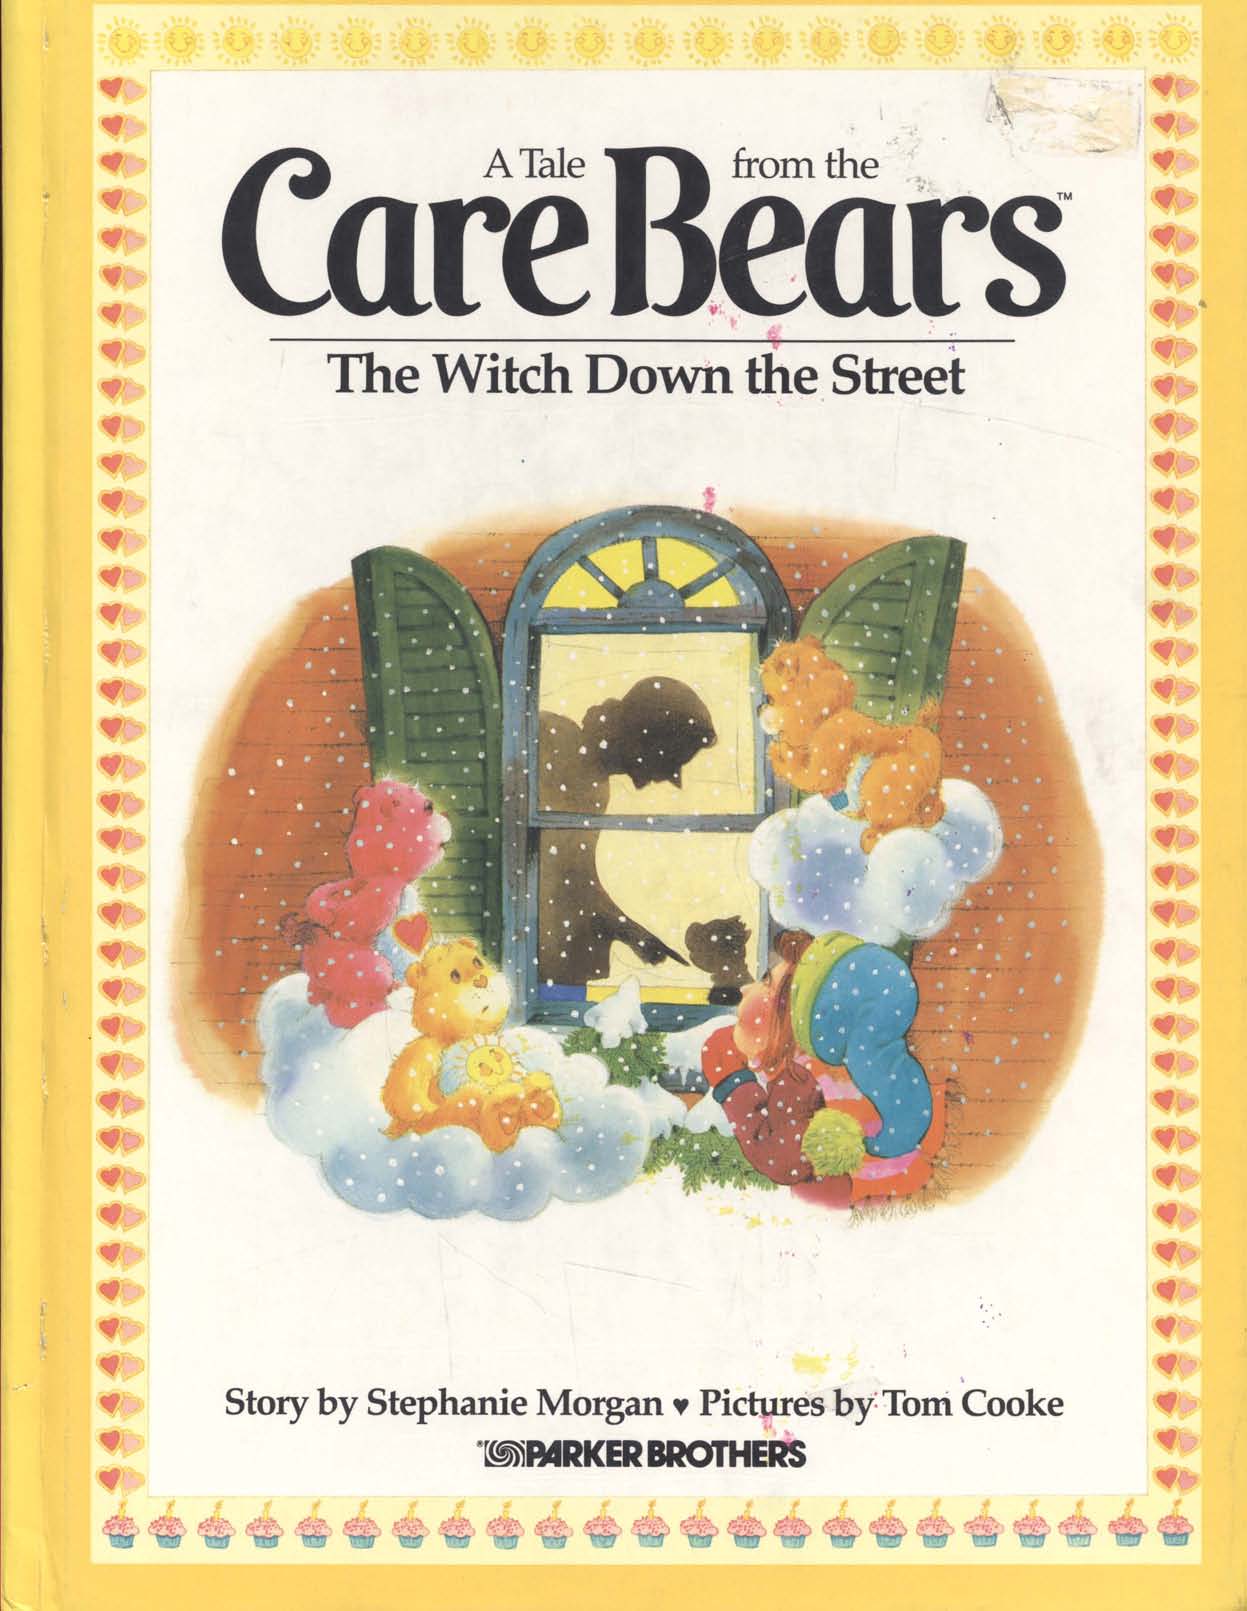 A Tale From the Care Bears – The Witch Down the Street (1983) (Tinkerhelly)